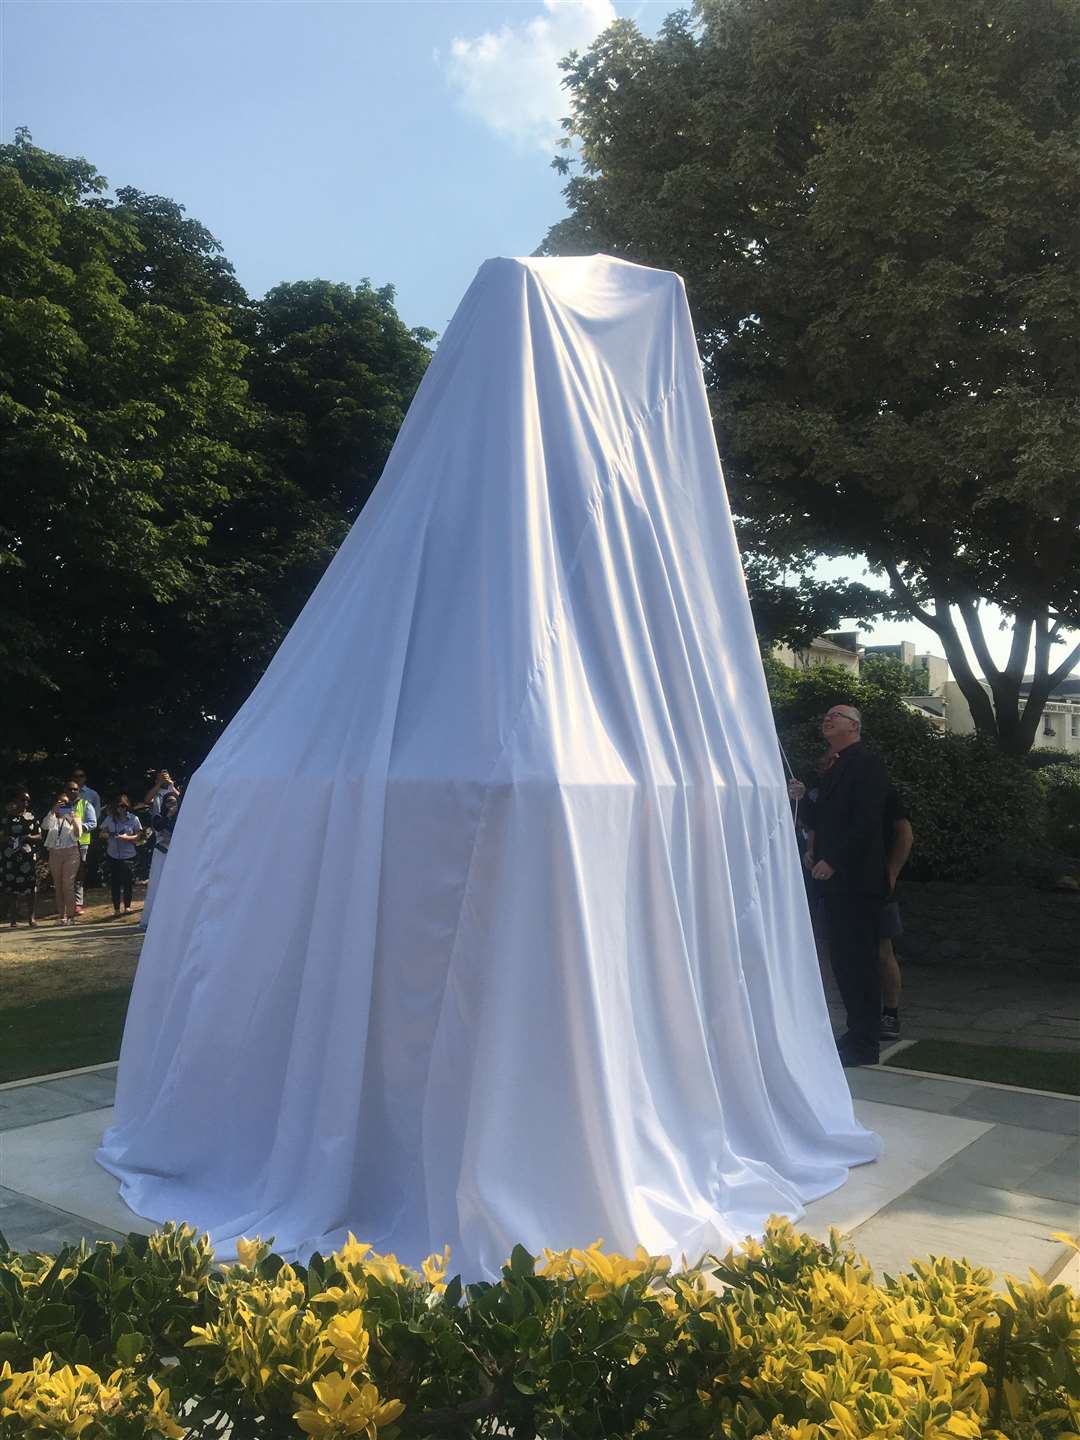 The Queen statue unveiled in Gravesend